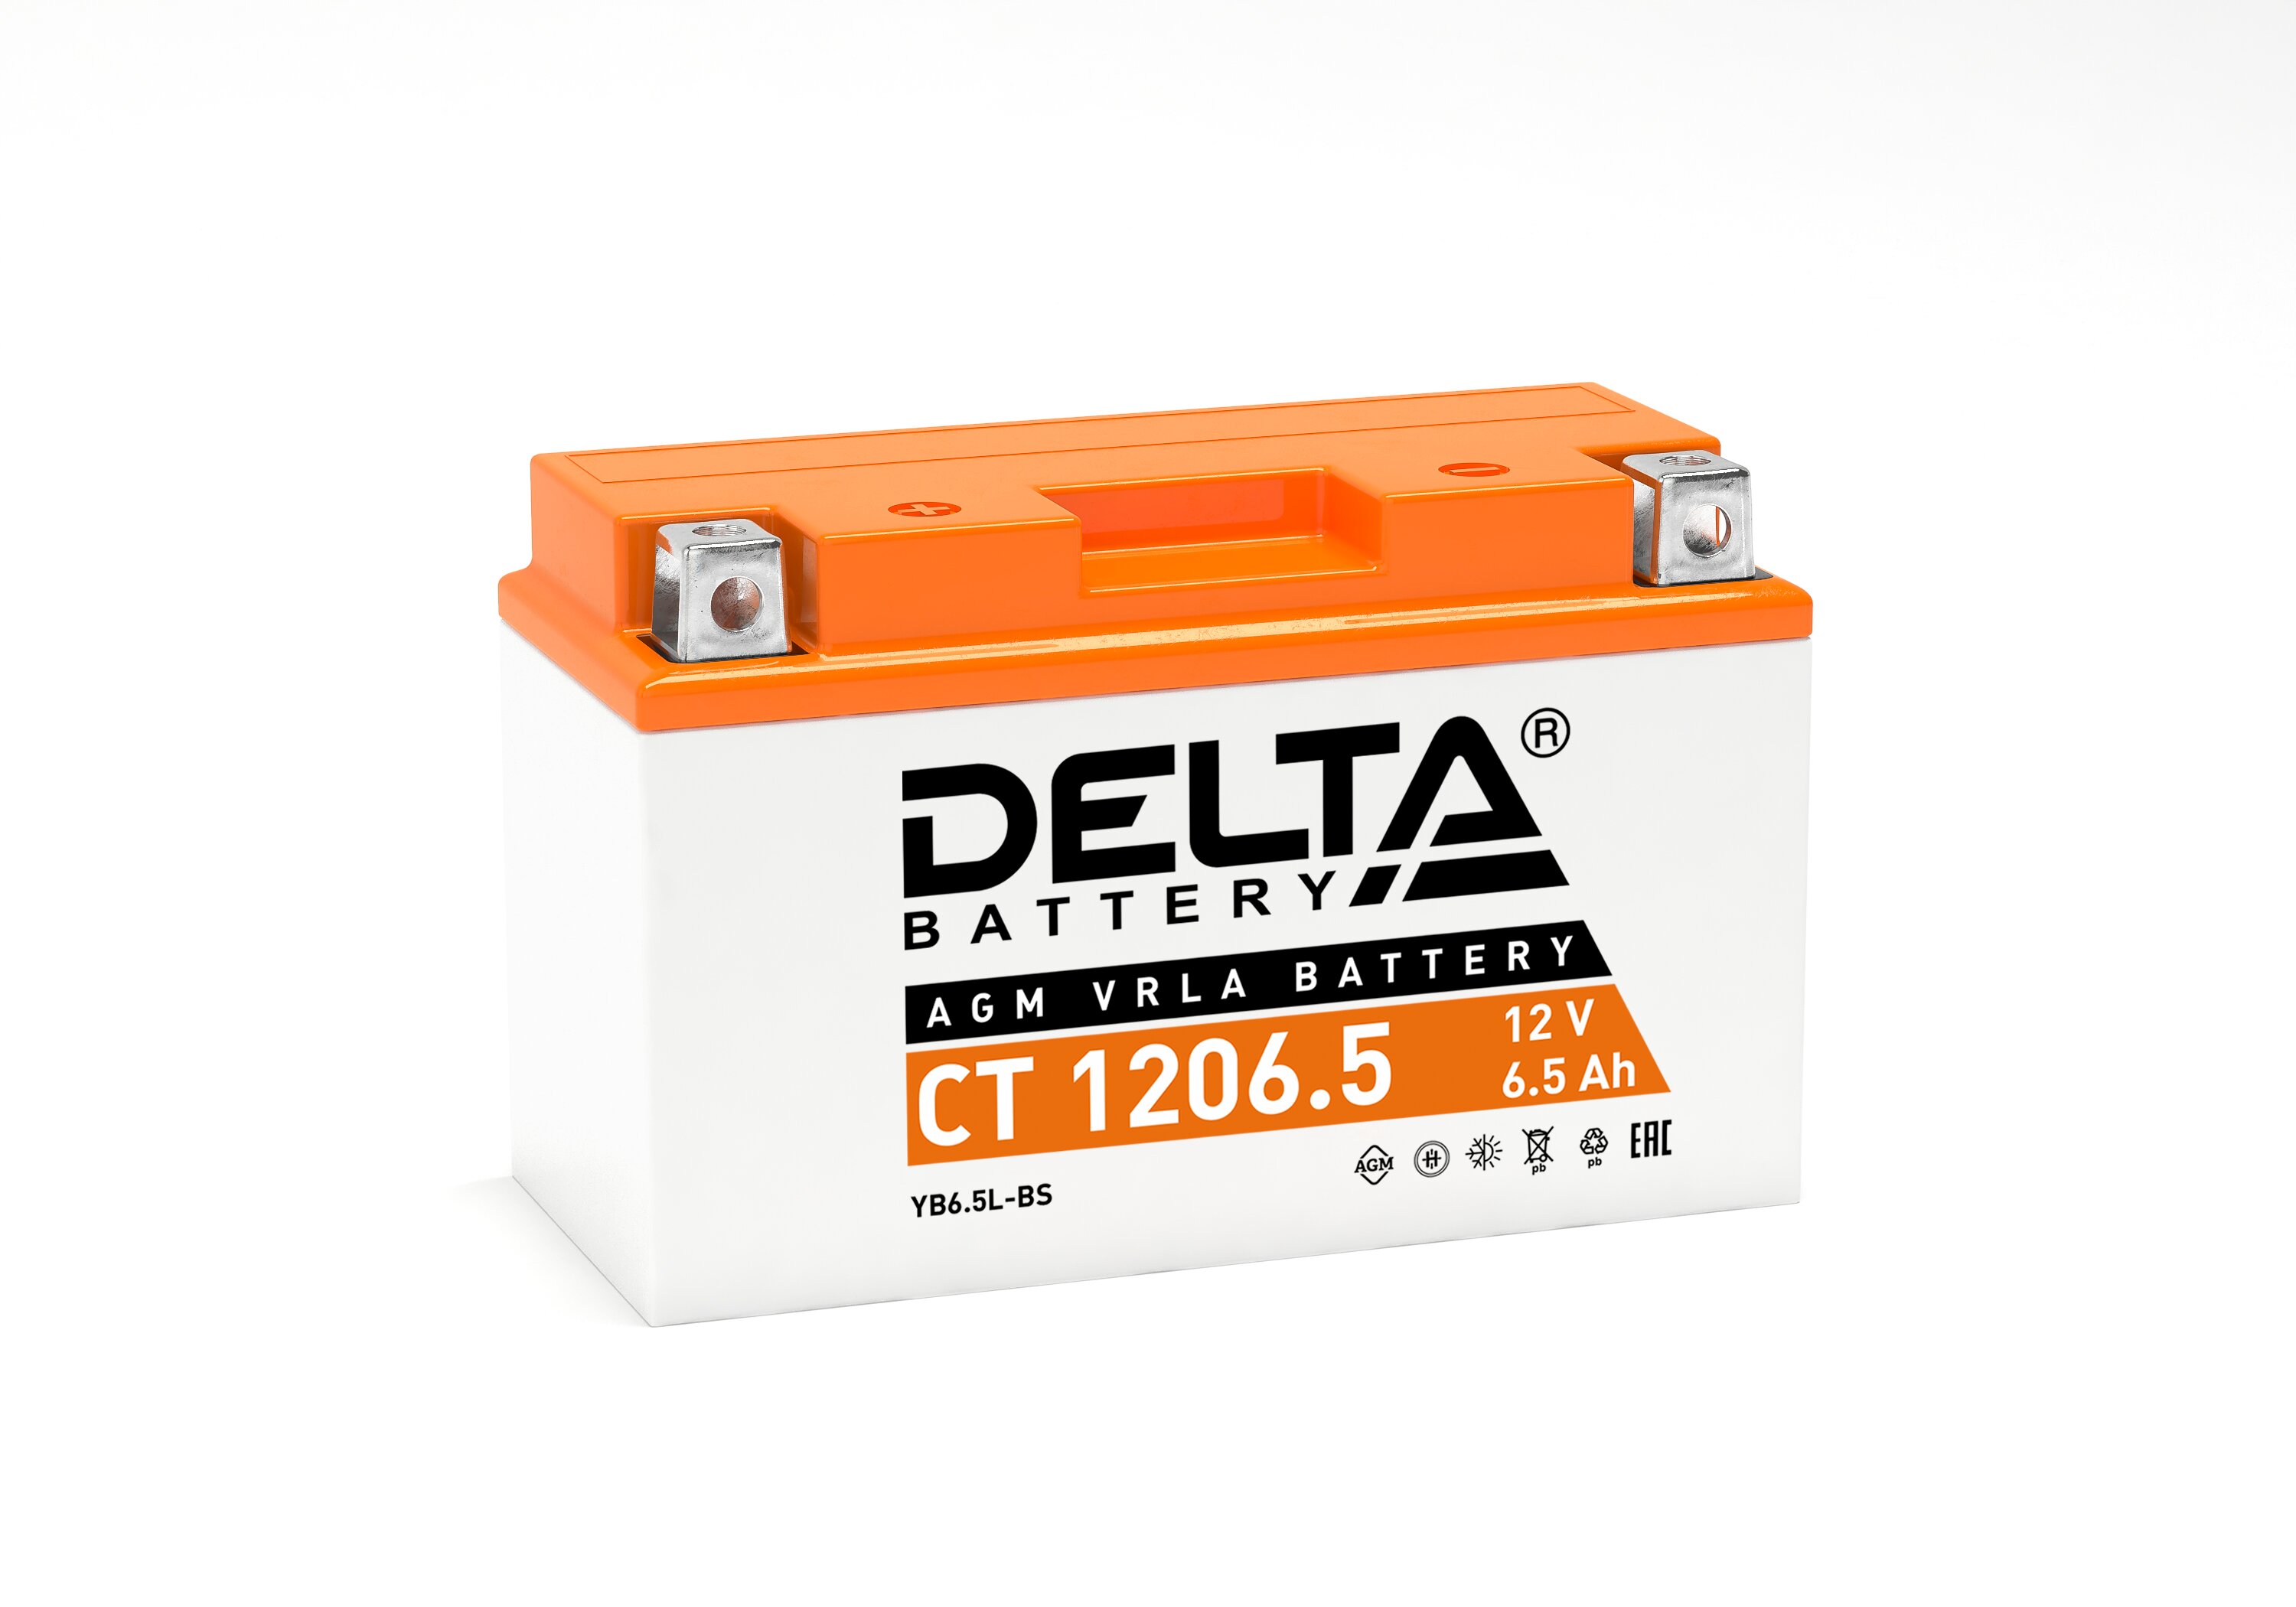  AGM - CT 1206.5 12 4 1147087 1,32 "Delta Battery"